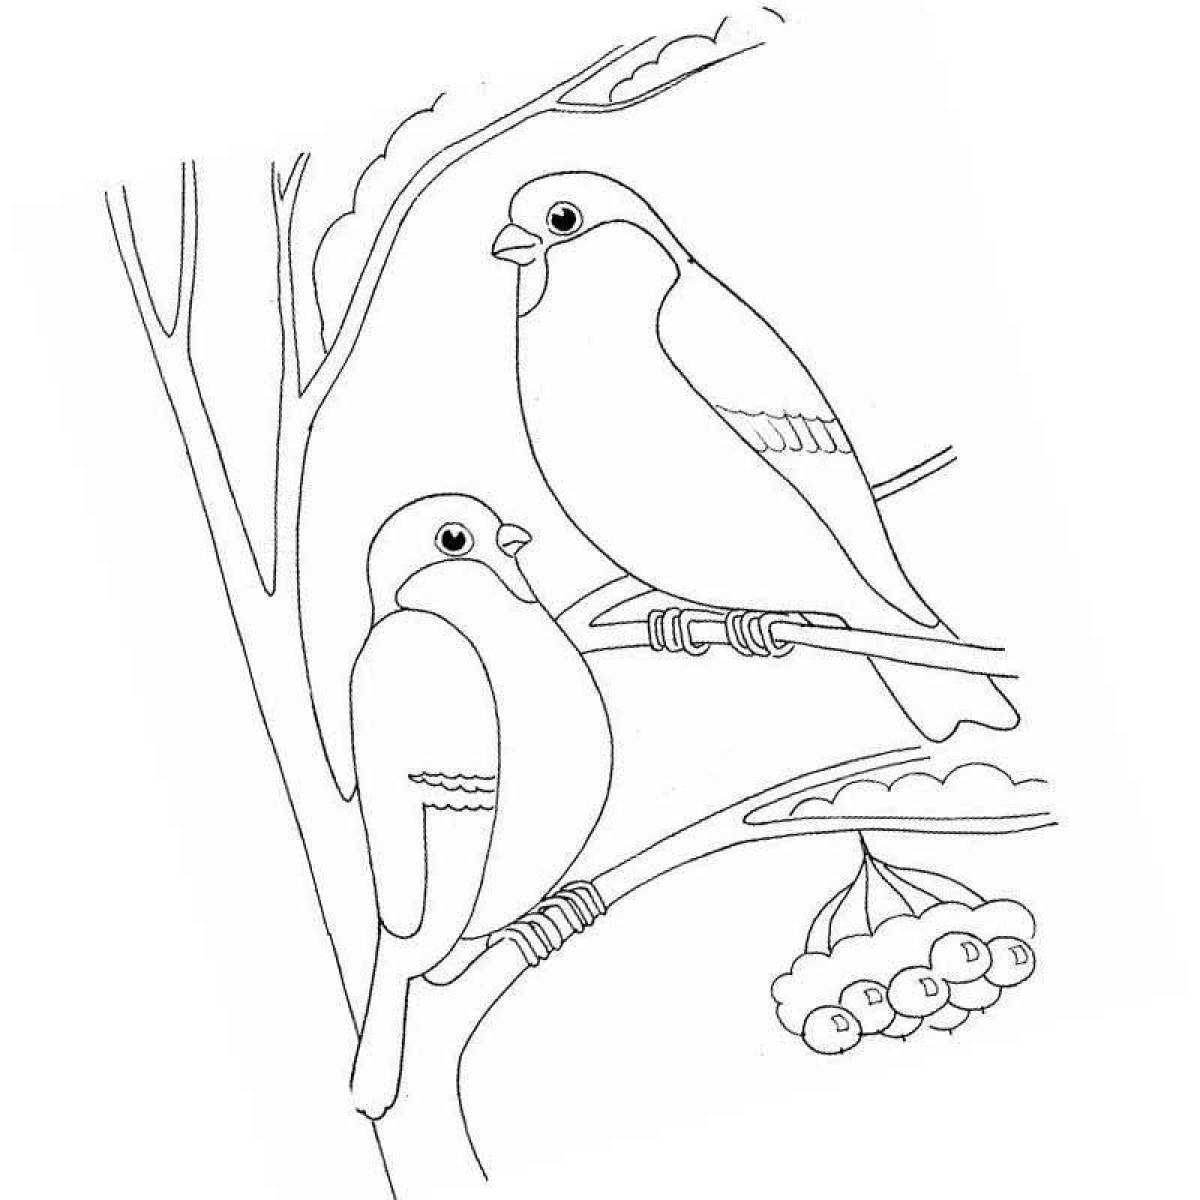 Glowing winter birds coloring page